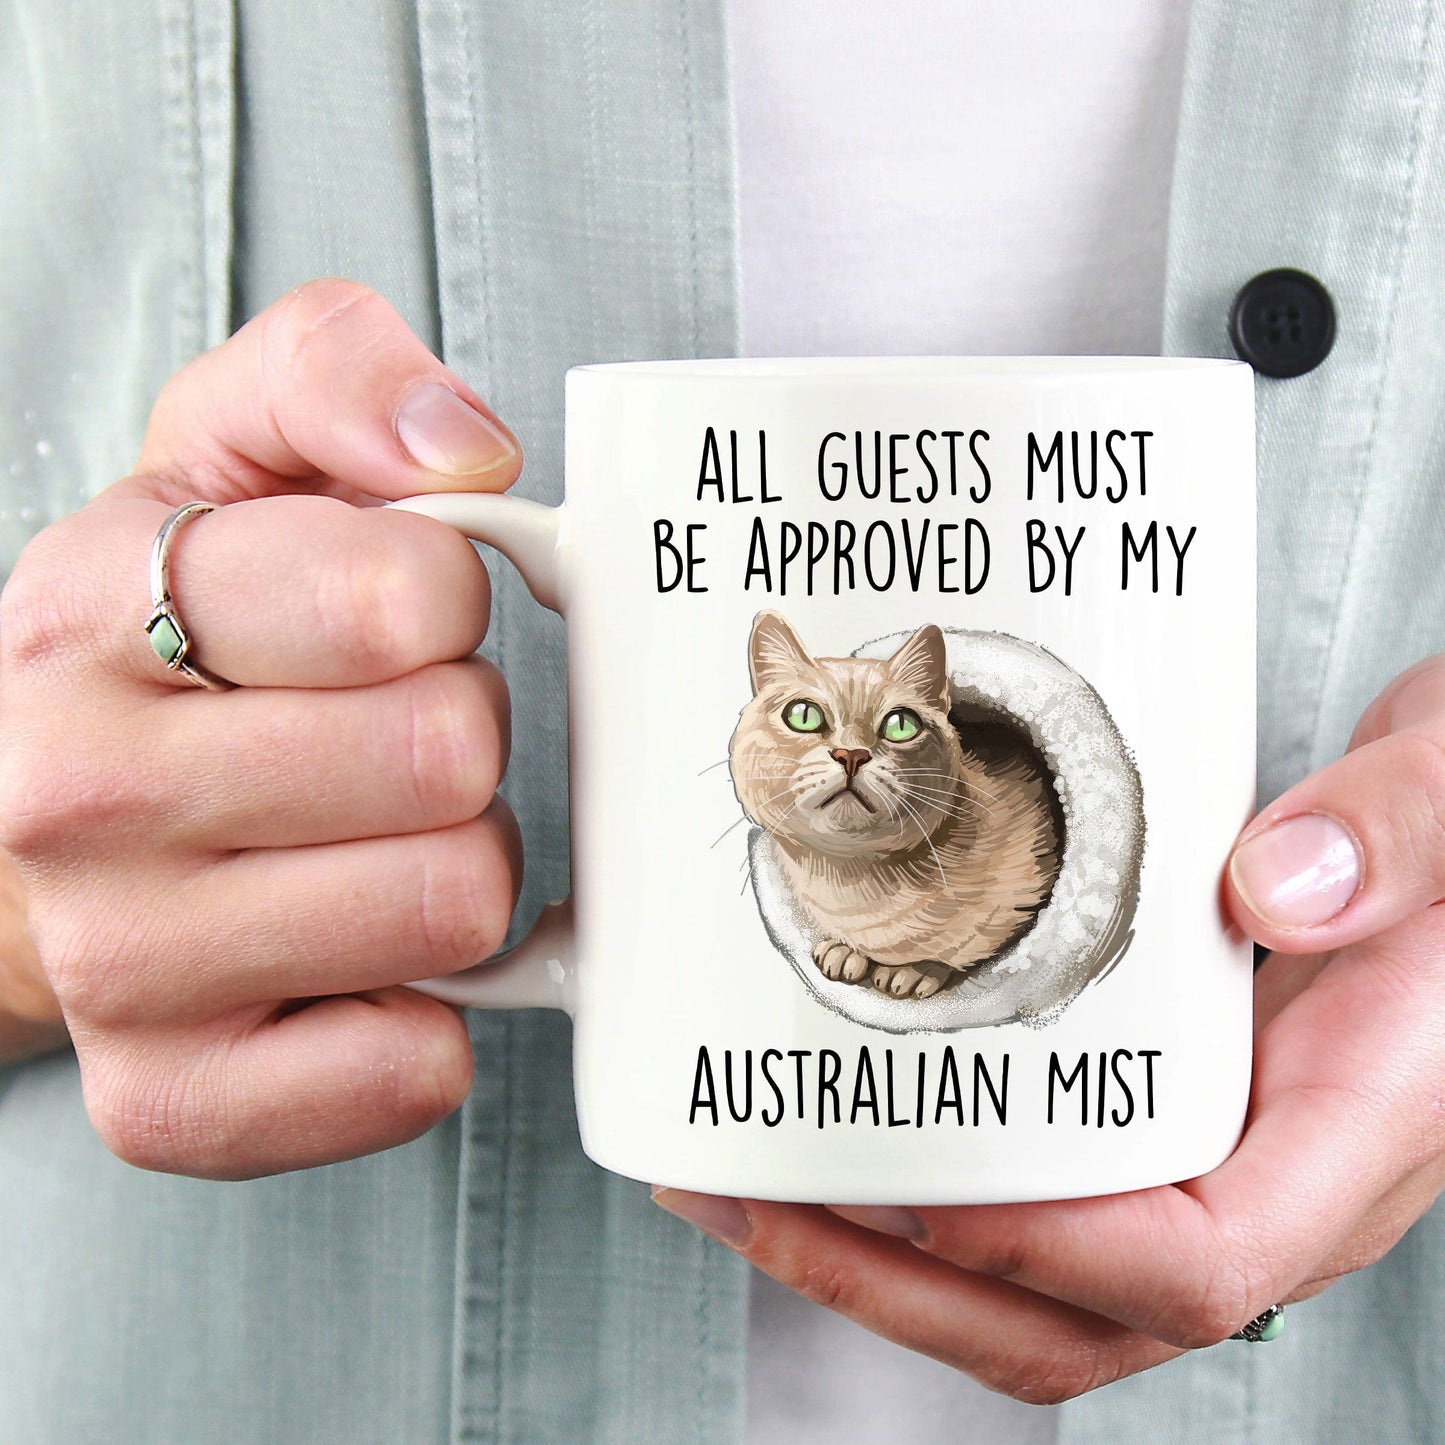 Australian Mist Cat Funny Coffee Mug - All Guests Must Be Approved